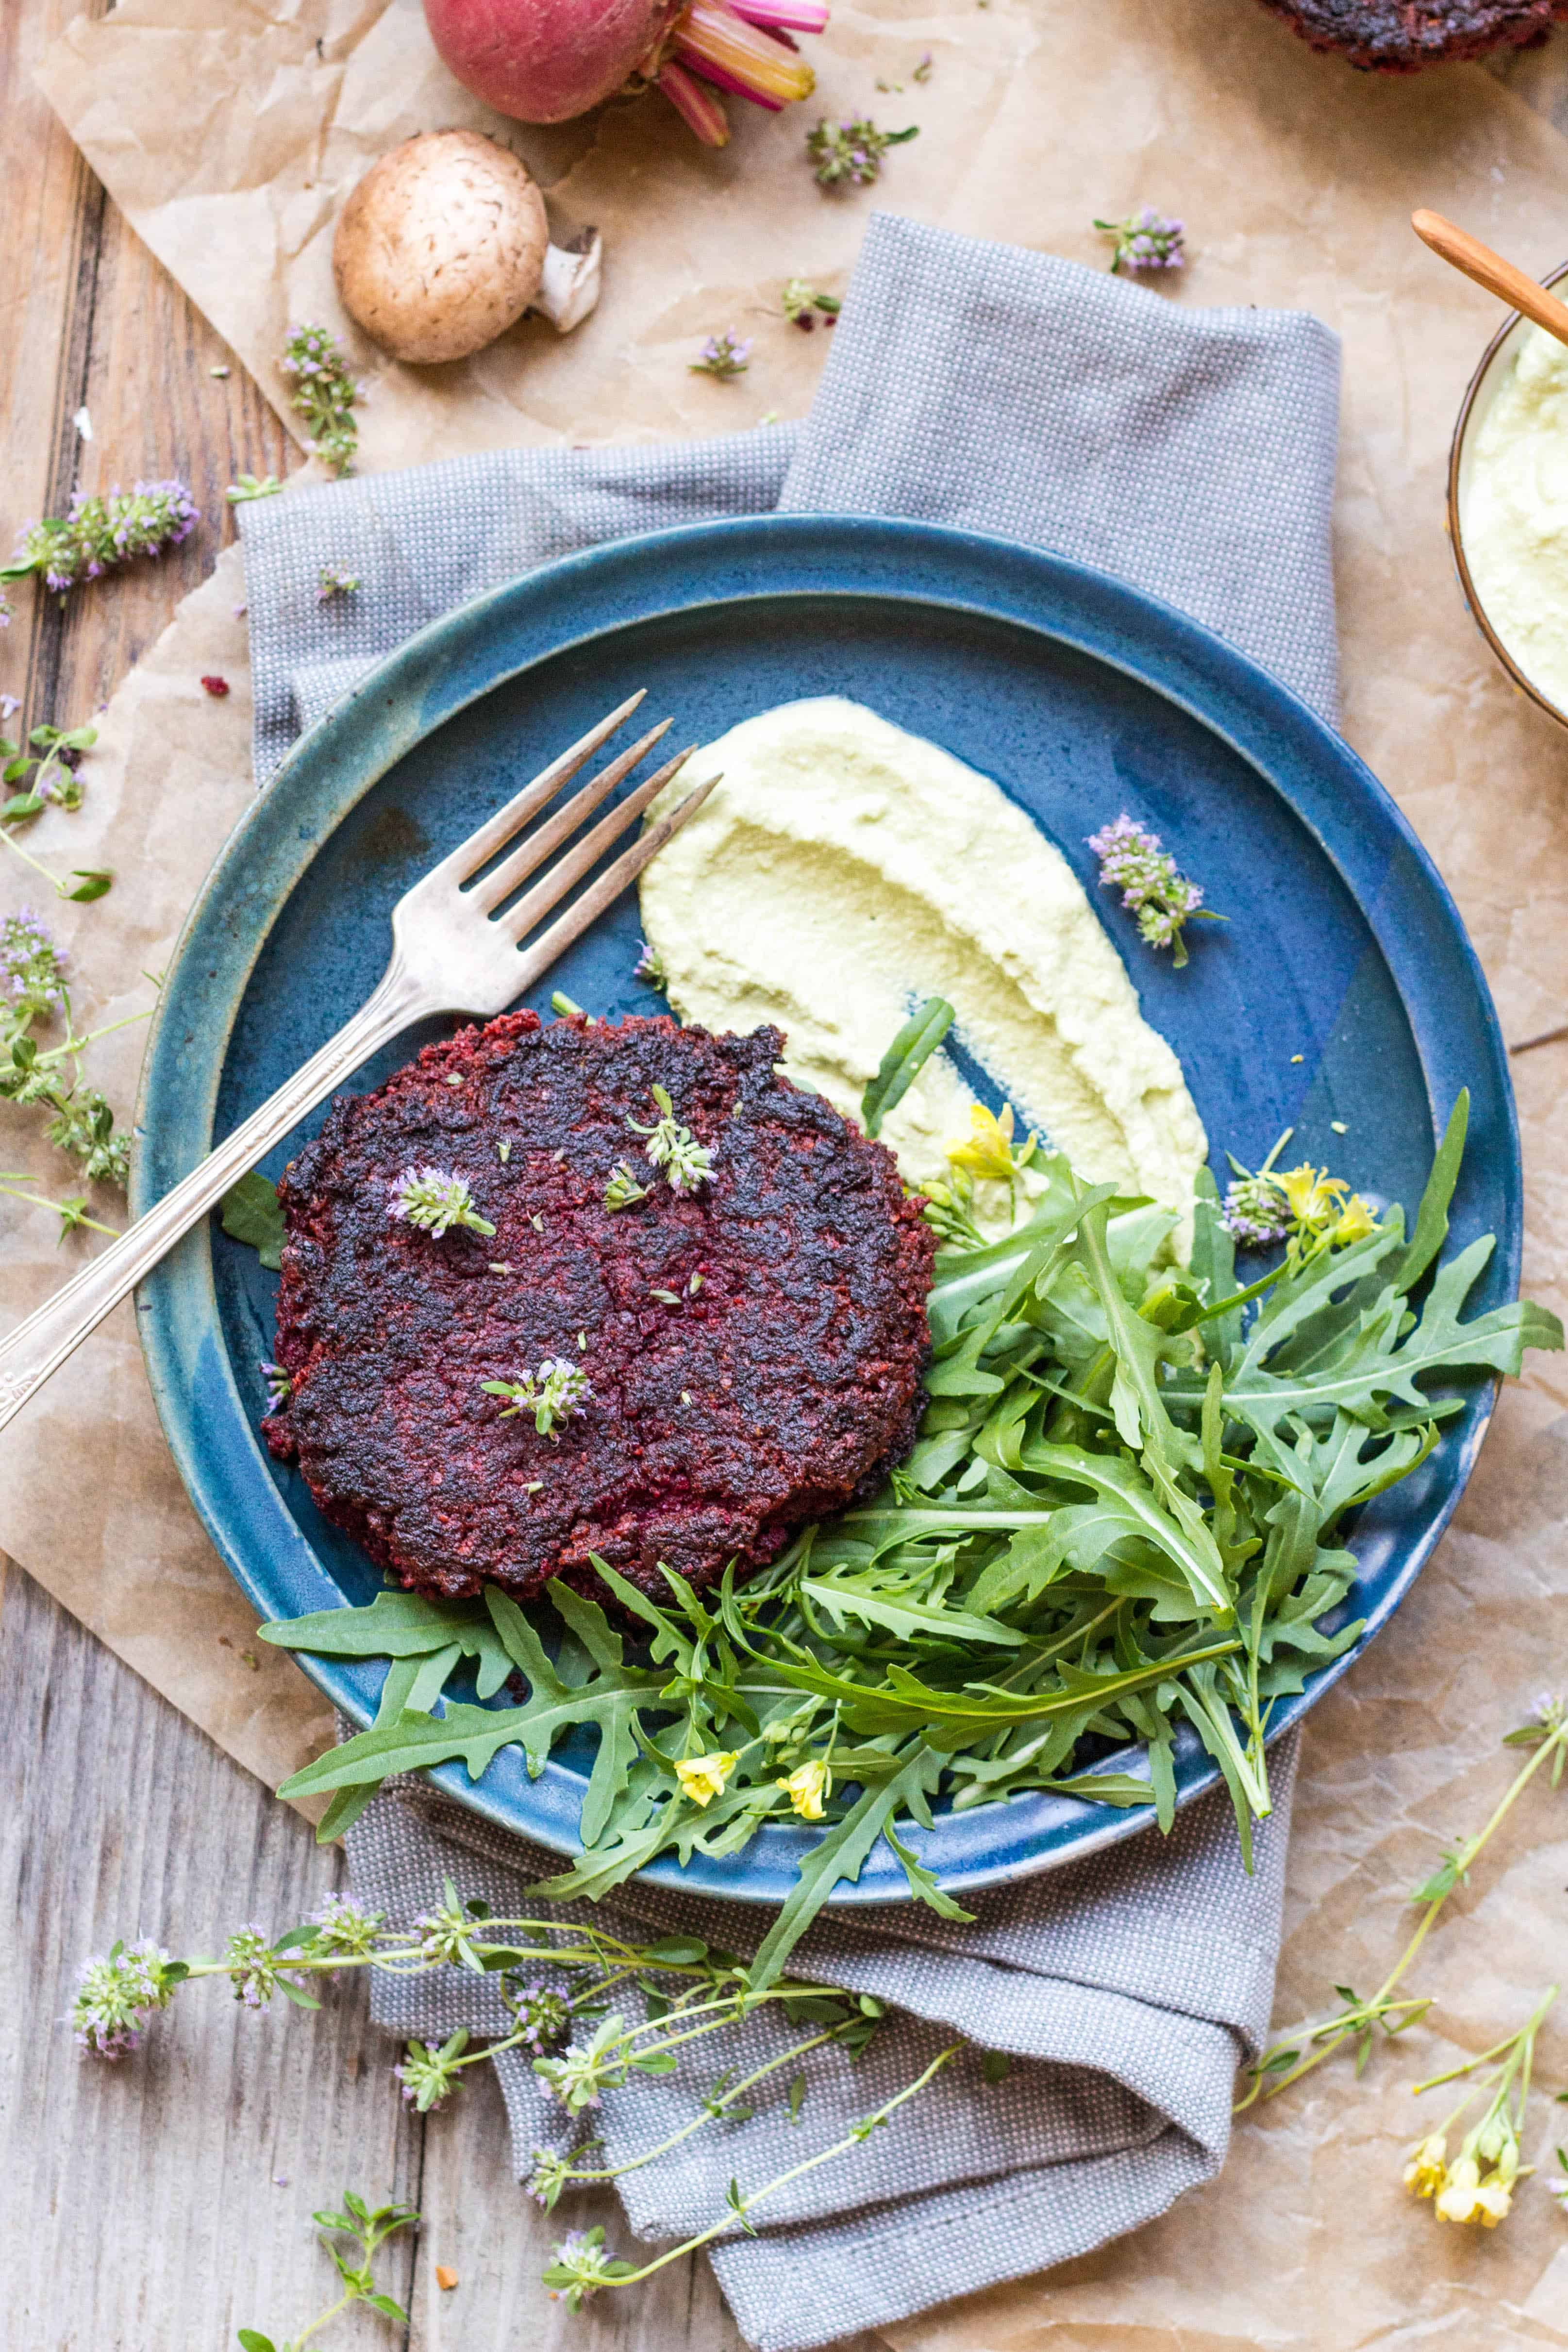 A blue plate with green goddess dressing, lentil beet burger, and side green salad next to a fork.